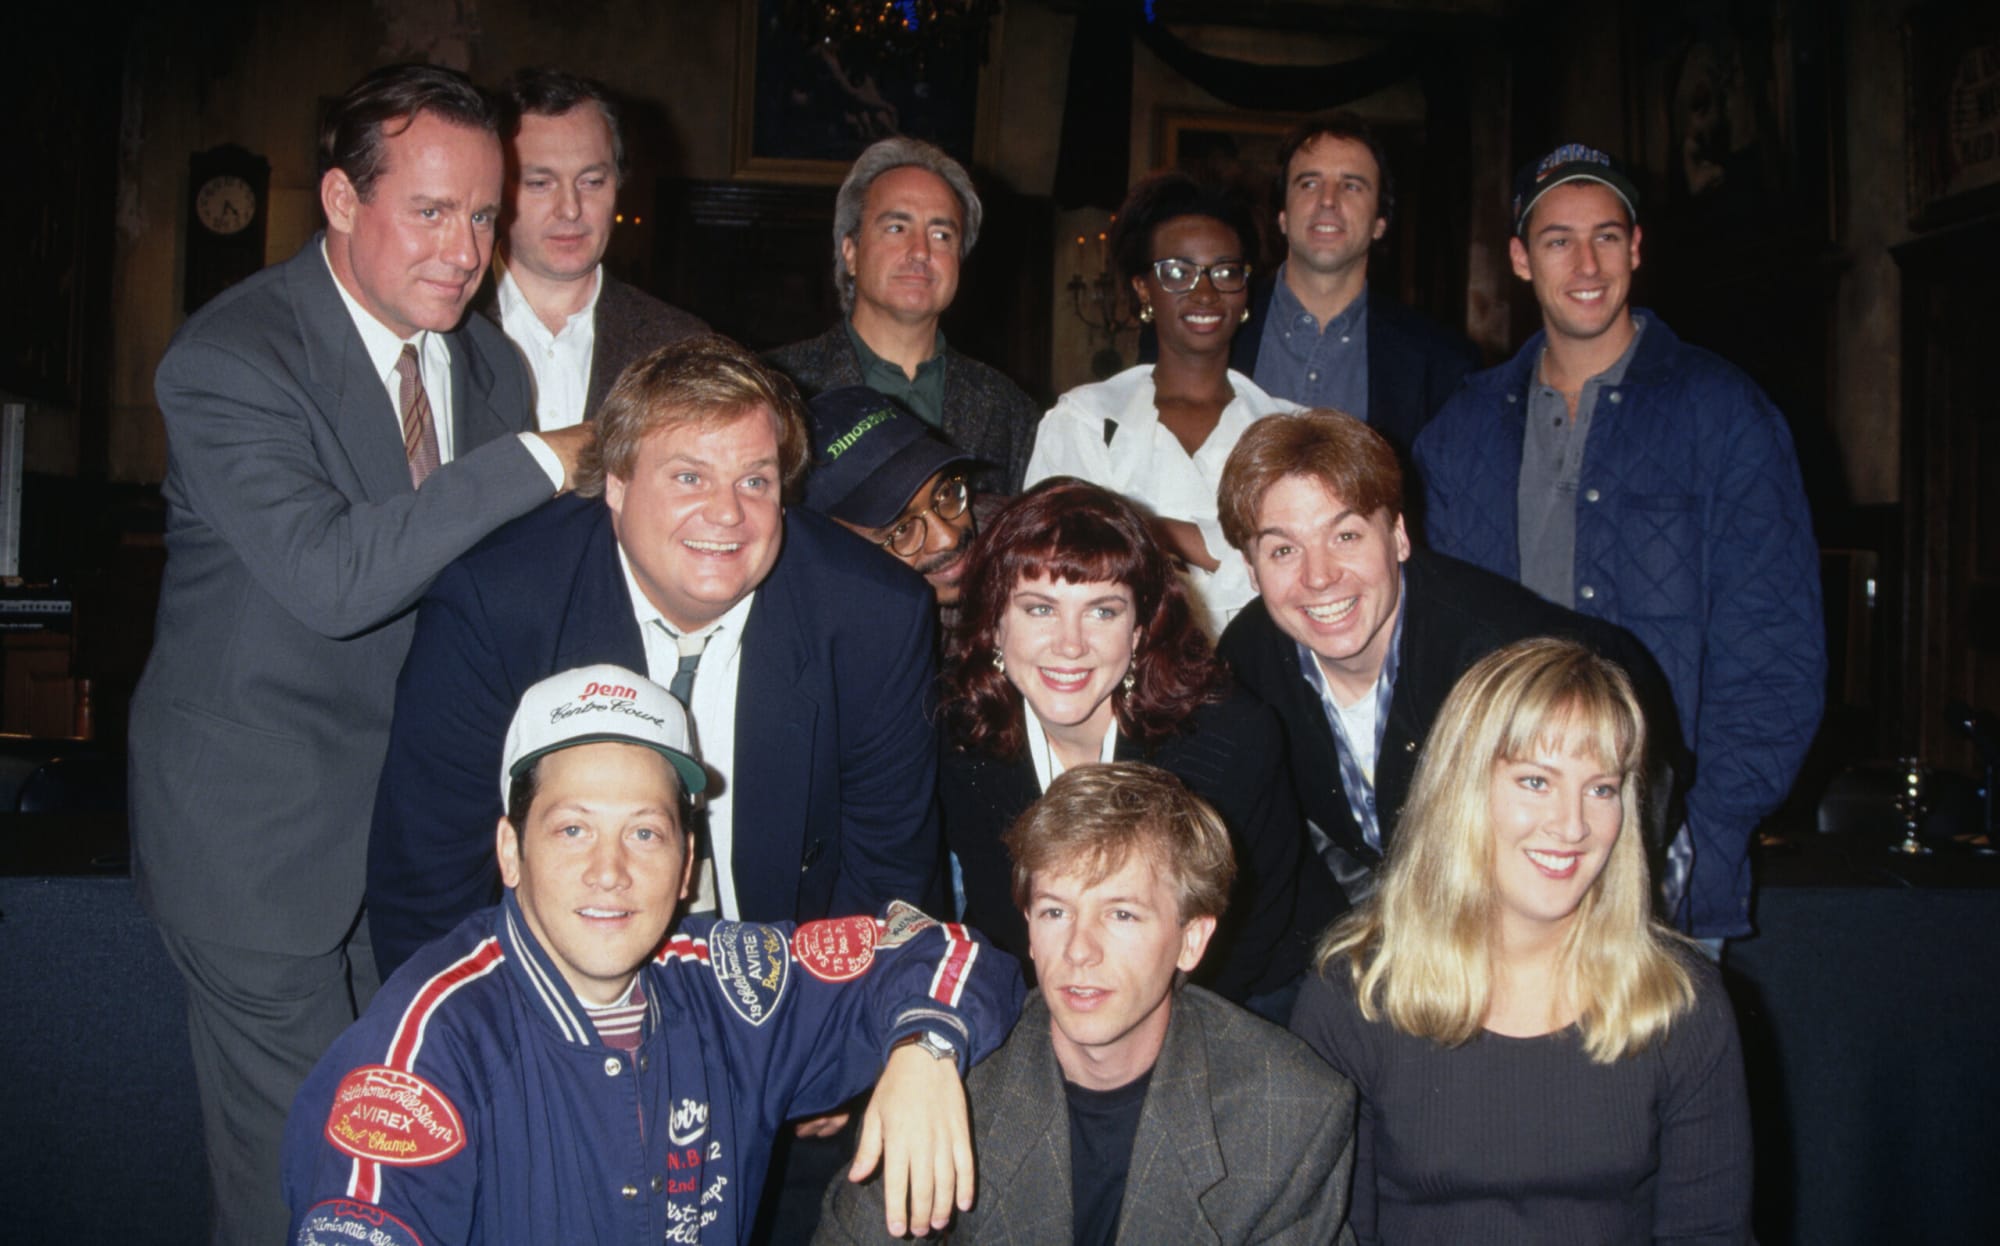 Saturday Night Live cast of 1993 Where are they now, 30 years later?